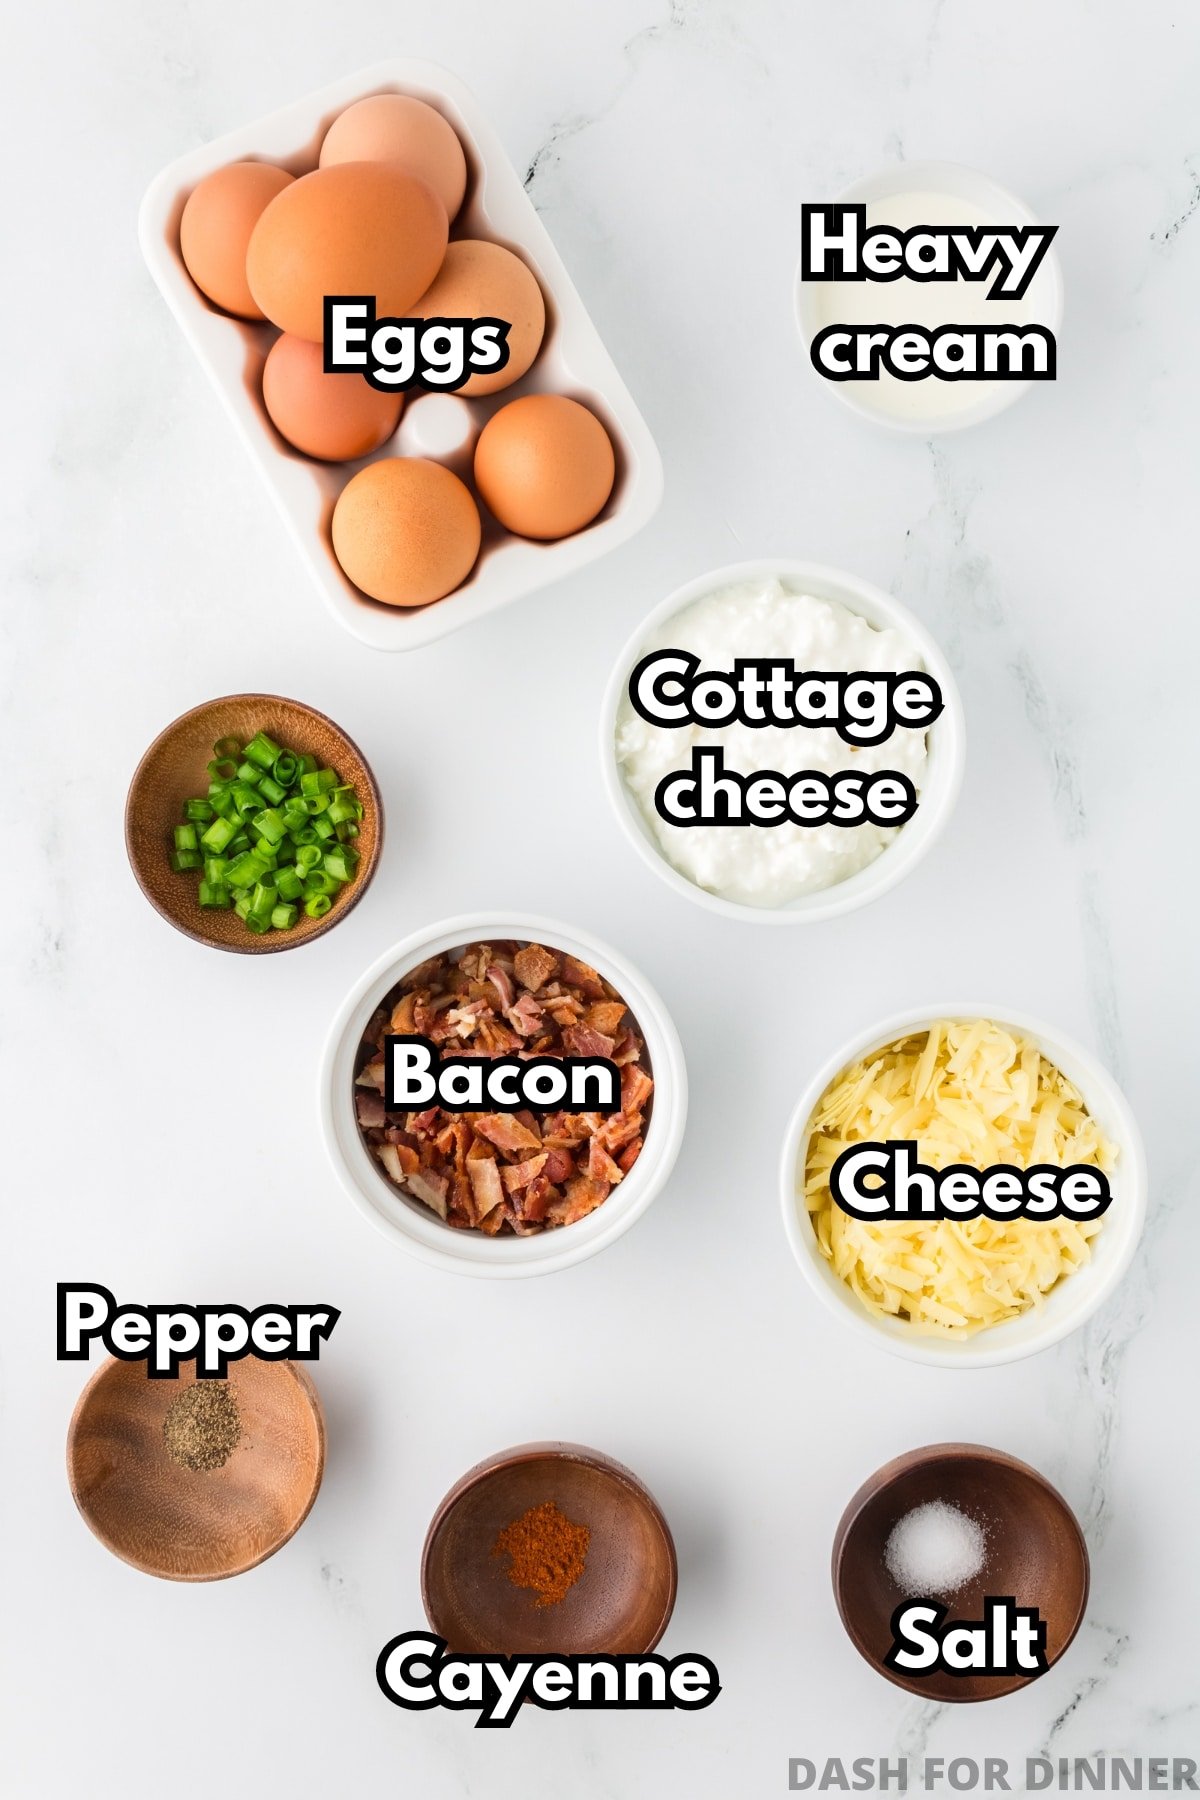 The ingredients needed to make cottage cheese egg bites: eggs, cottage cheese, cheese, bacon, seasonings, and heavy cream.